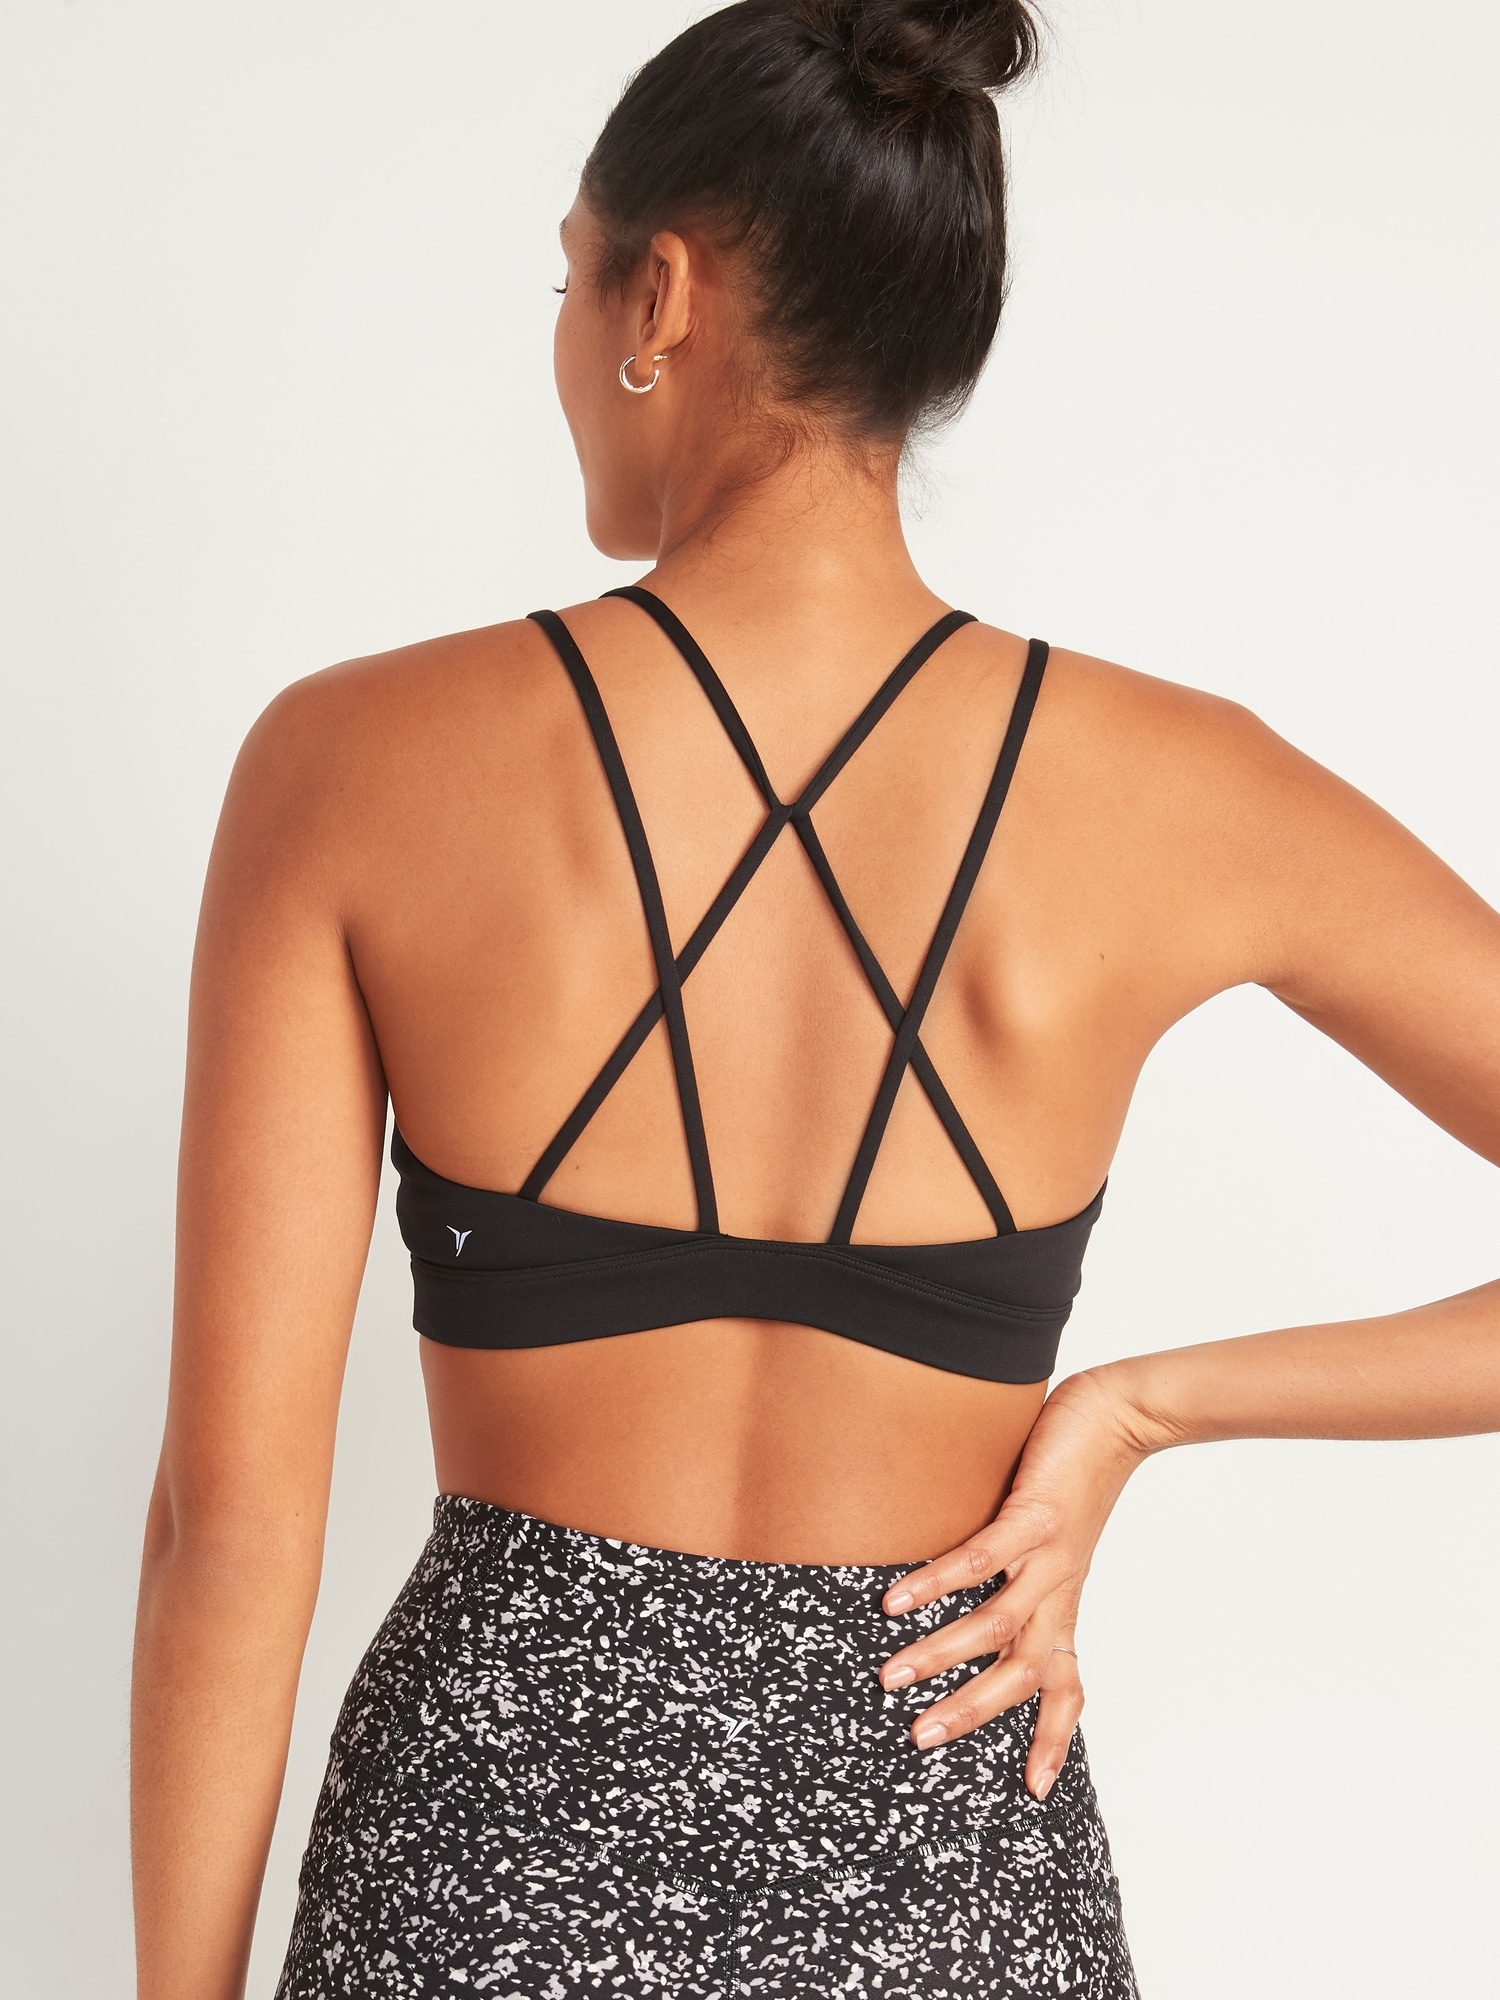 Is That The New Light Support Criss Cross Backless Sports Bra ??